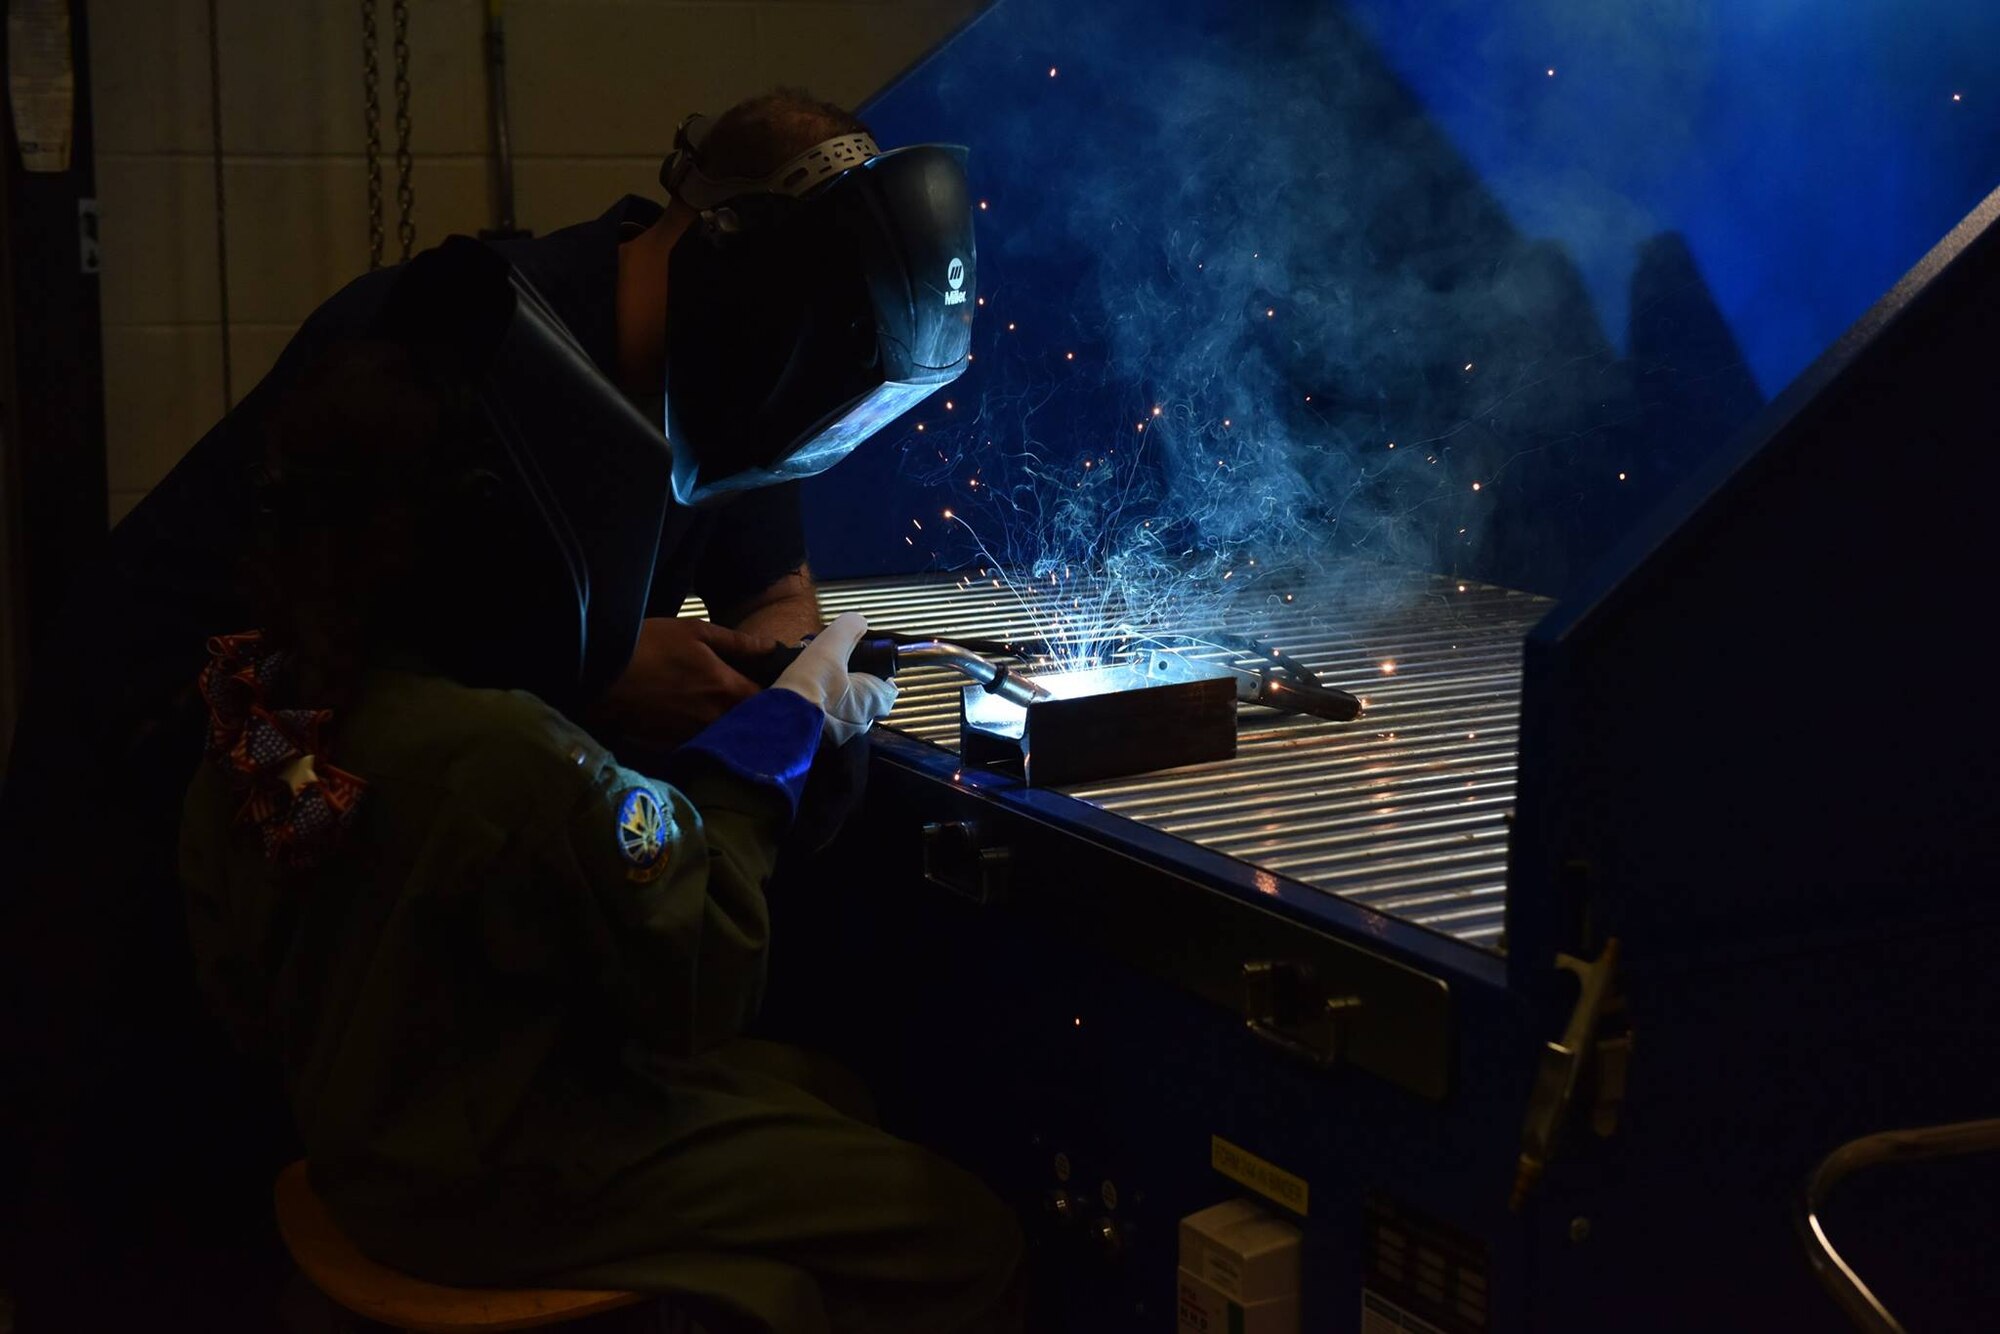 12 year-old Norah Carter, honorary second lieutenant of the 911th Airlift Wing, welds under the supervision of Tech Sgt. Joe Davis, metals technician with the 911th Maintenance Squadron at the Pittsburgh International Air Reserve Station, May 11, 2016. Norah was nominated for the Pilot for a Day program by her doctors with the Allegheny Health Network, where she is being treated for an undiagnosed genetic disorder. (U.S. Air Force Photo by 2nd Lt. Jacob Morgan)